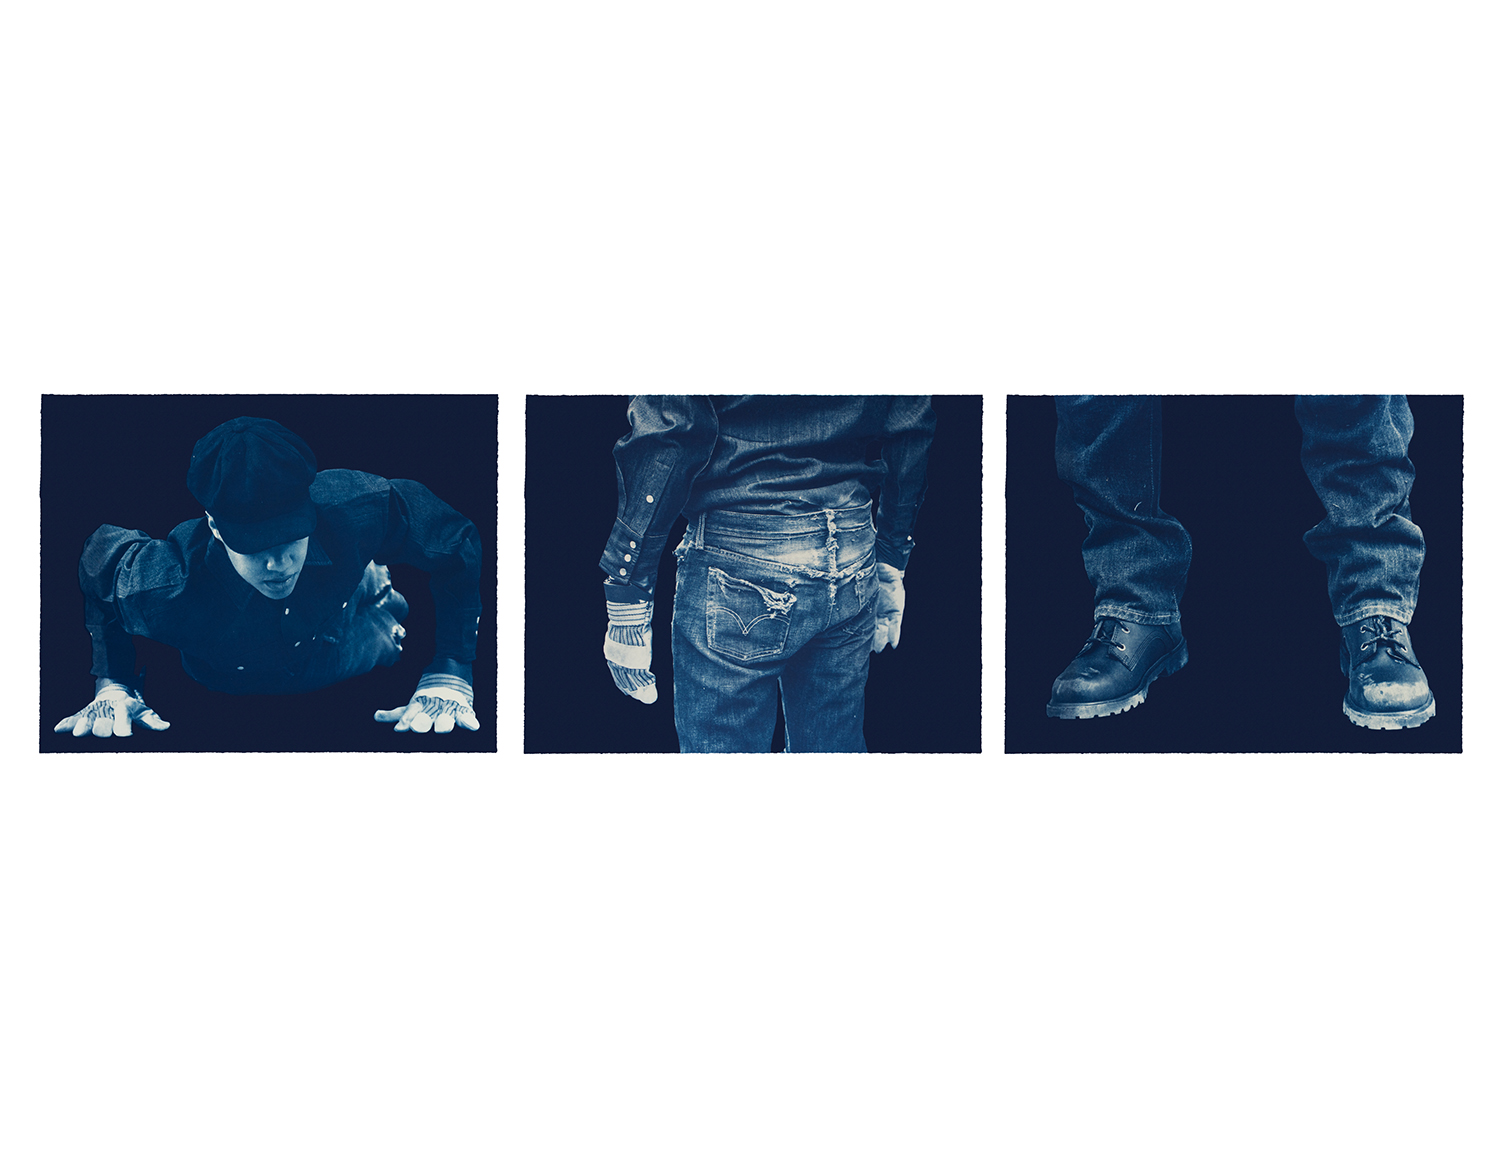 If Everybody's Work Is Equally Important? (I), 2017, cyanotype, 22 x 28 inches each image and sheet, suite of 3, edition of 12. Price:  $10,000.